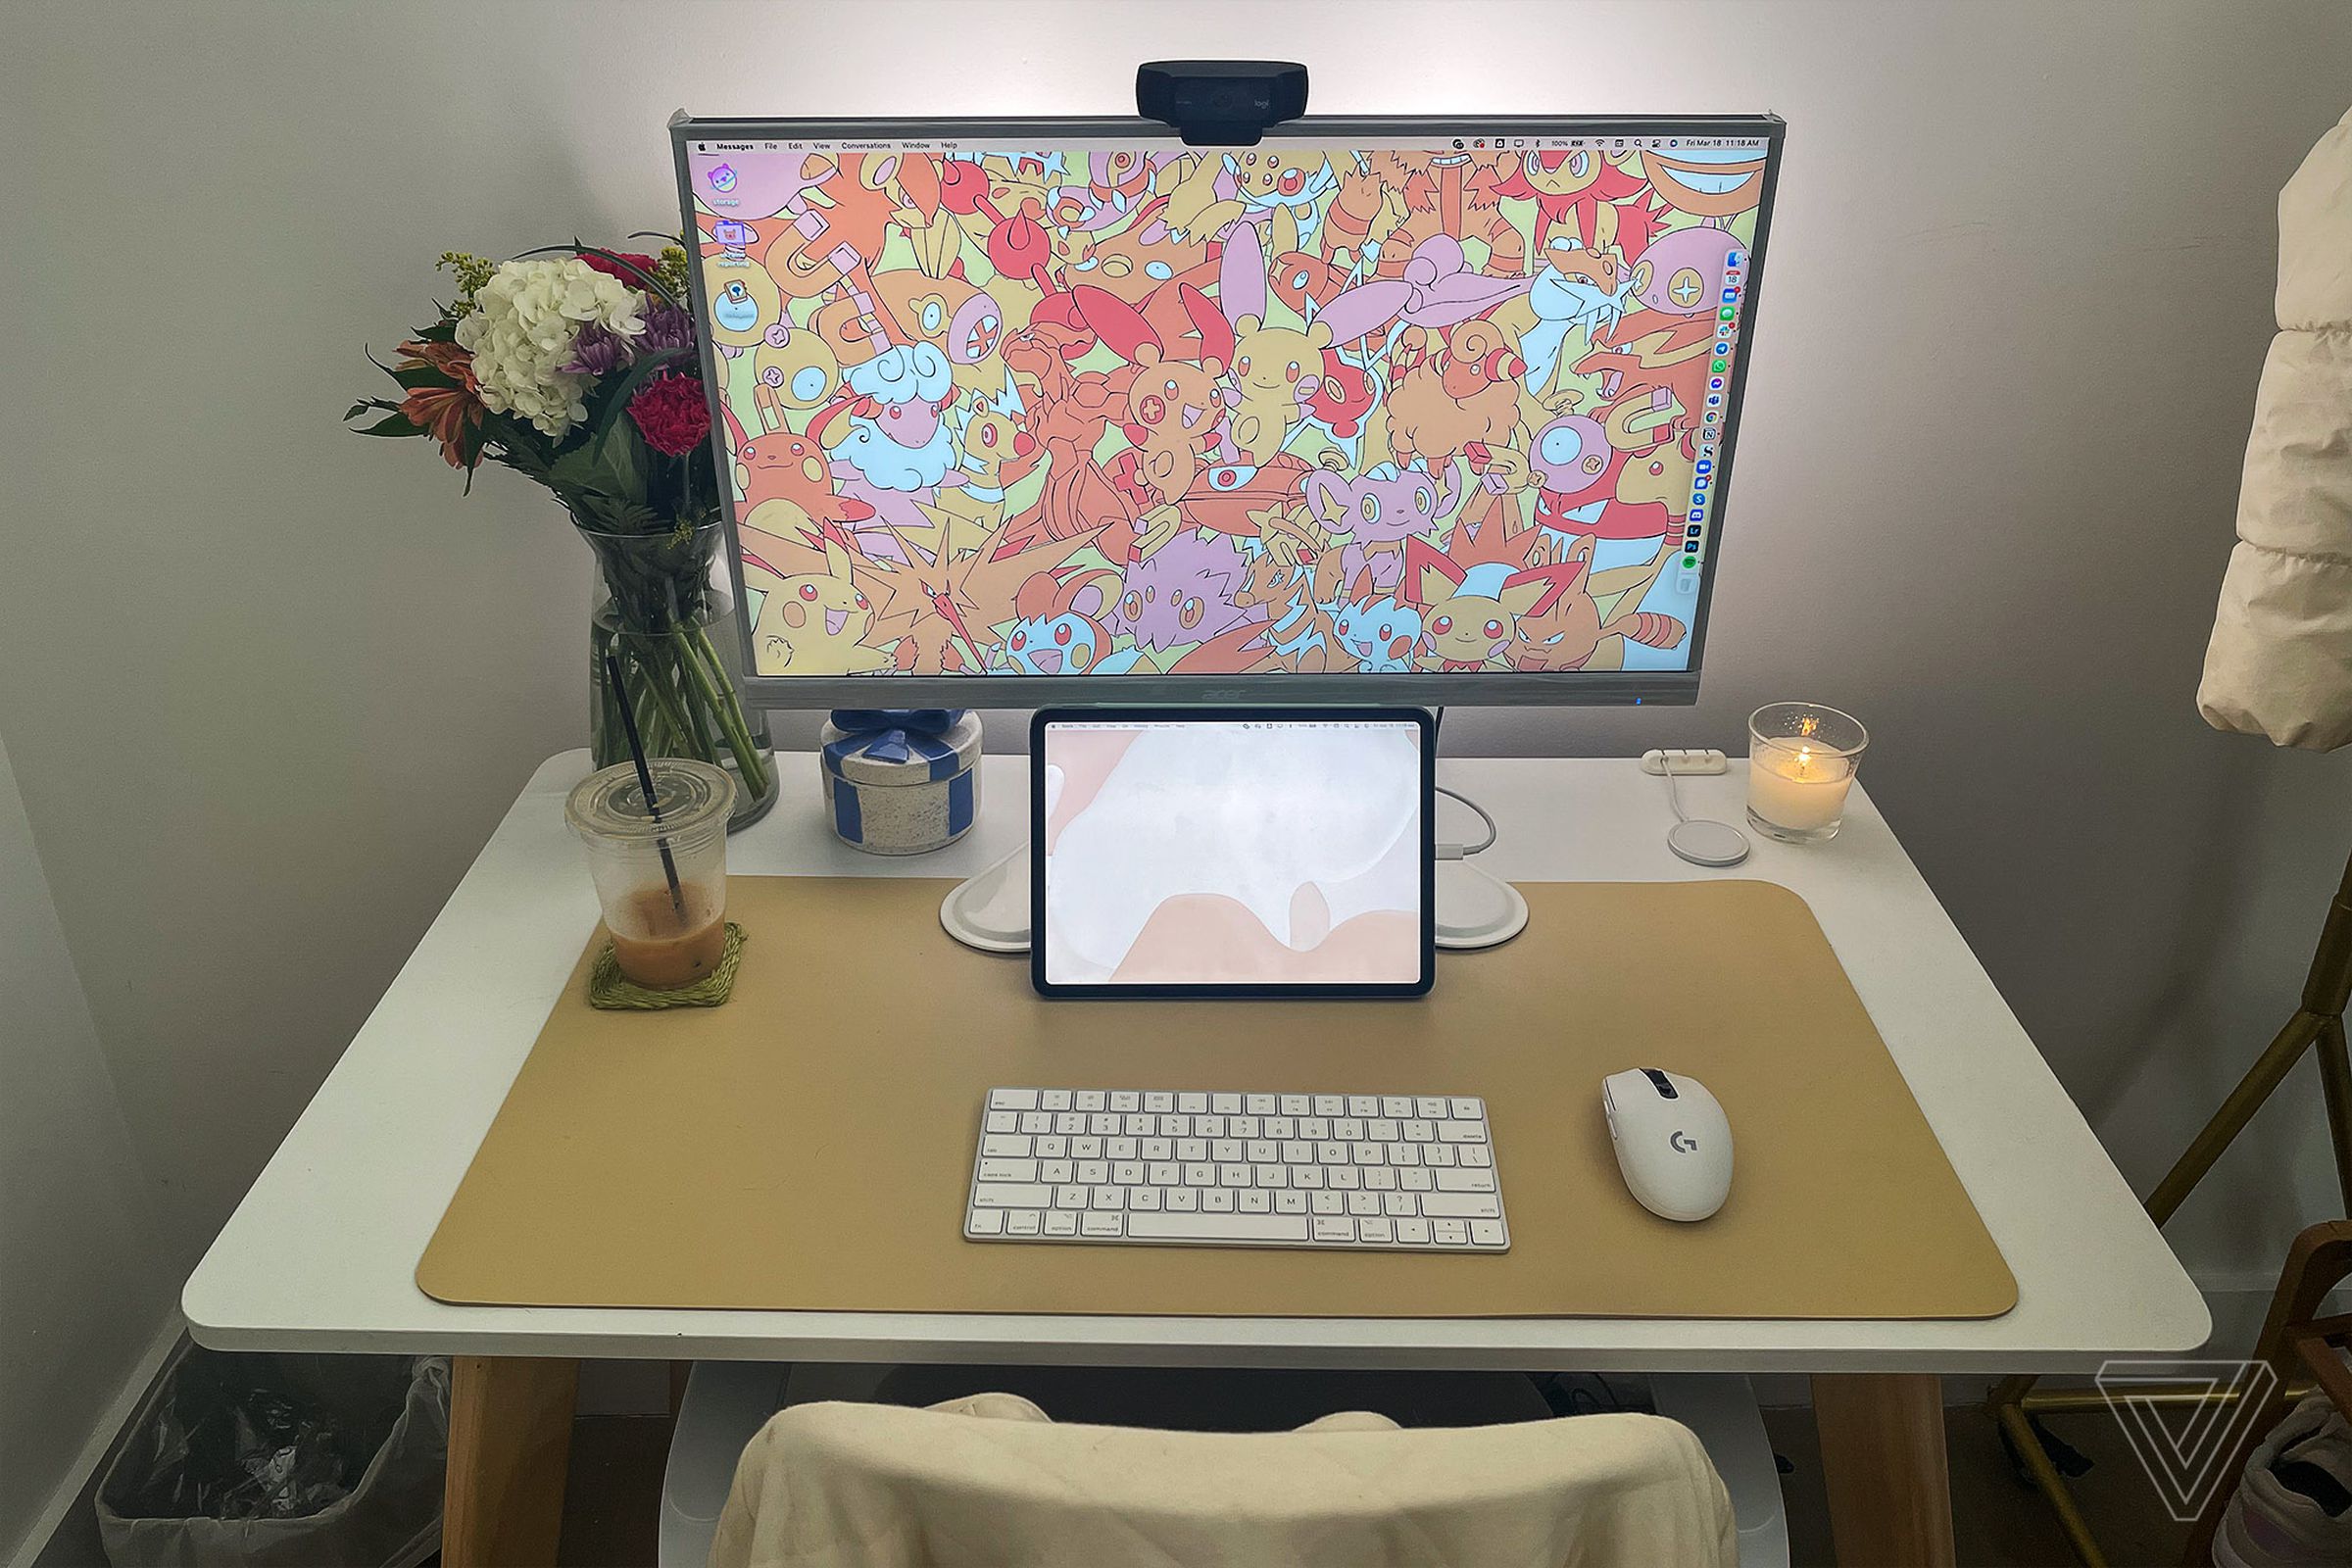 Even a cheap desk can look nice when well-decorated.